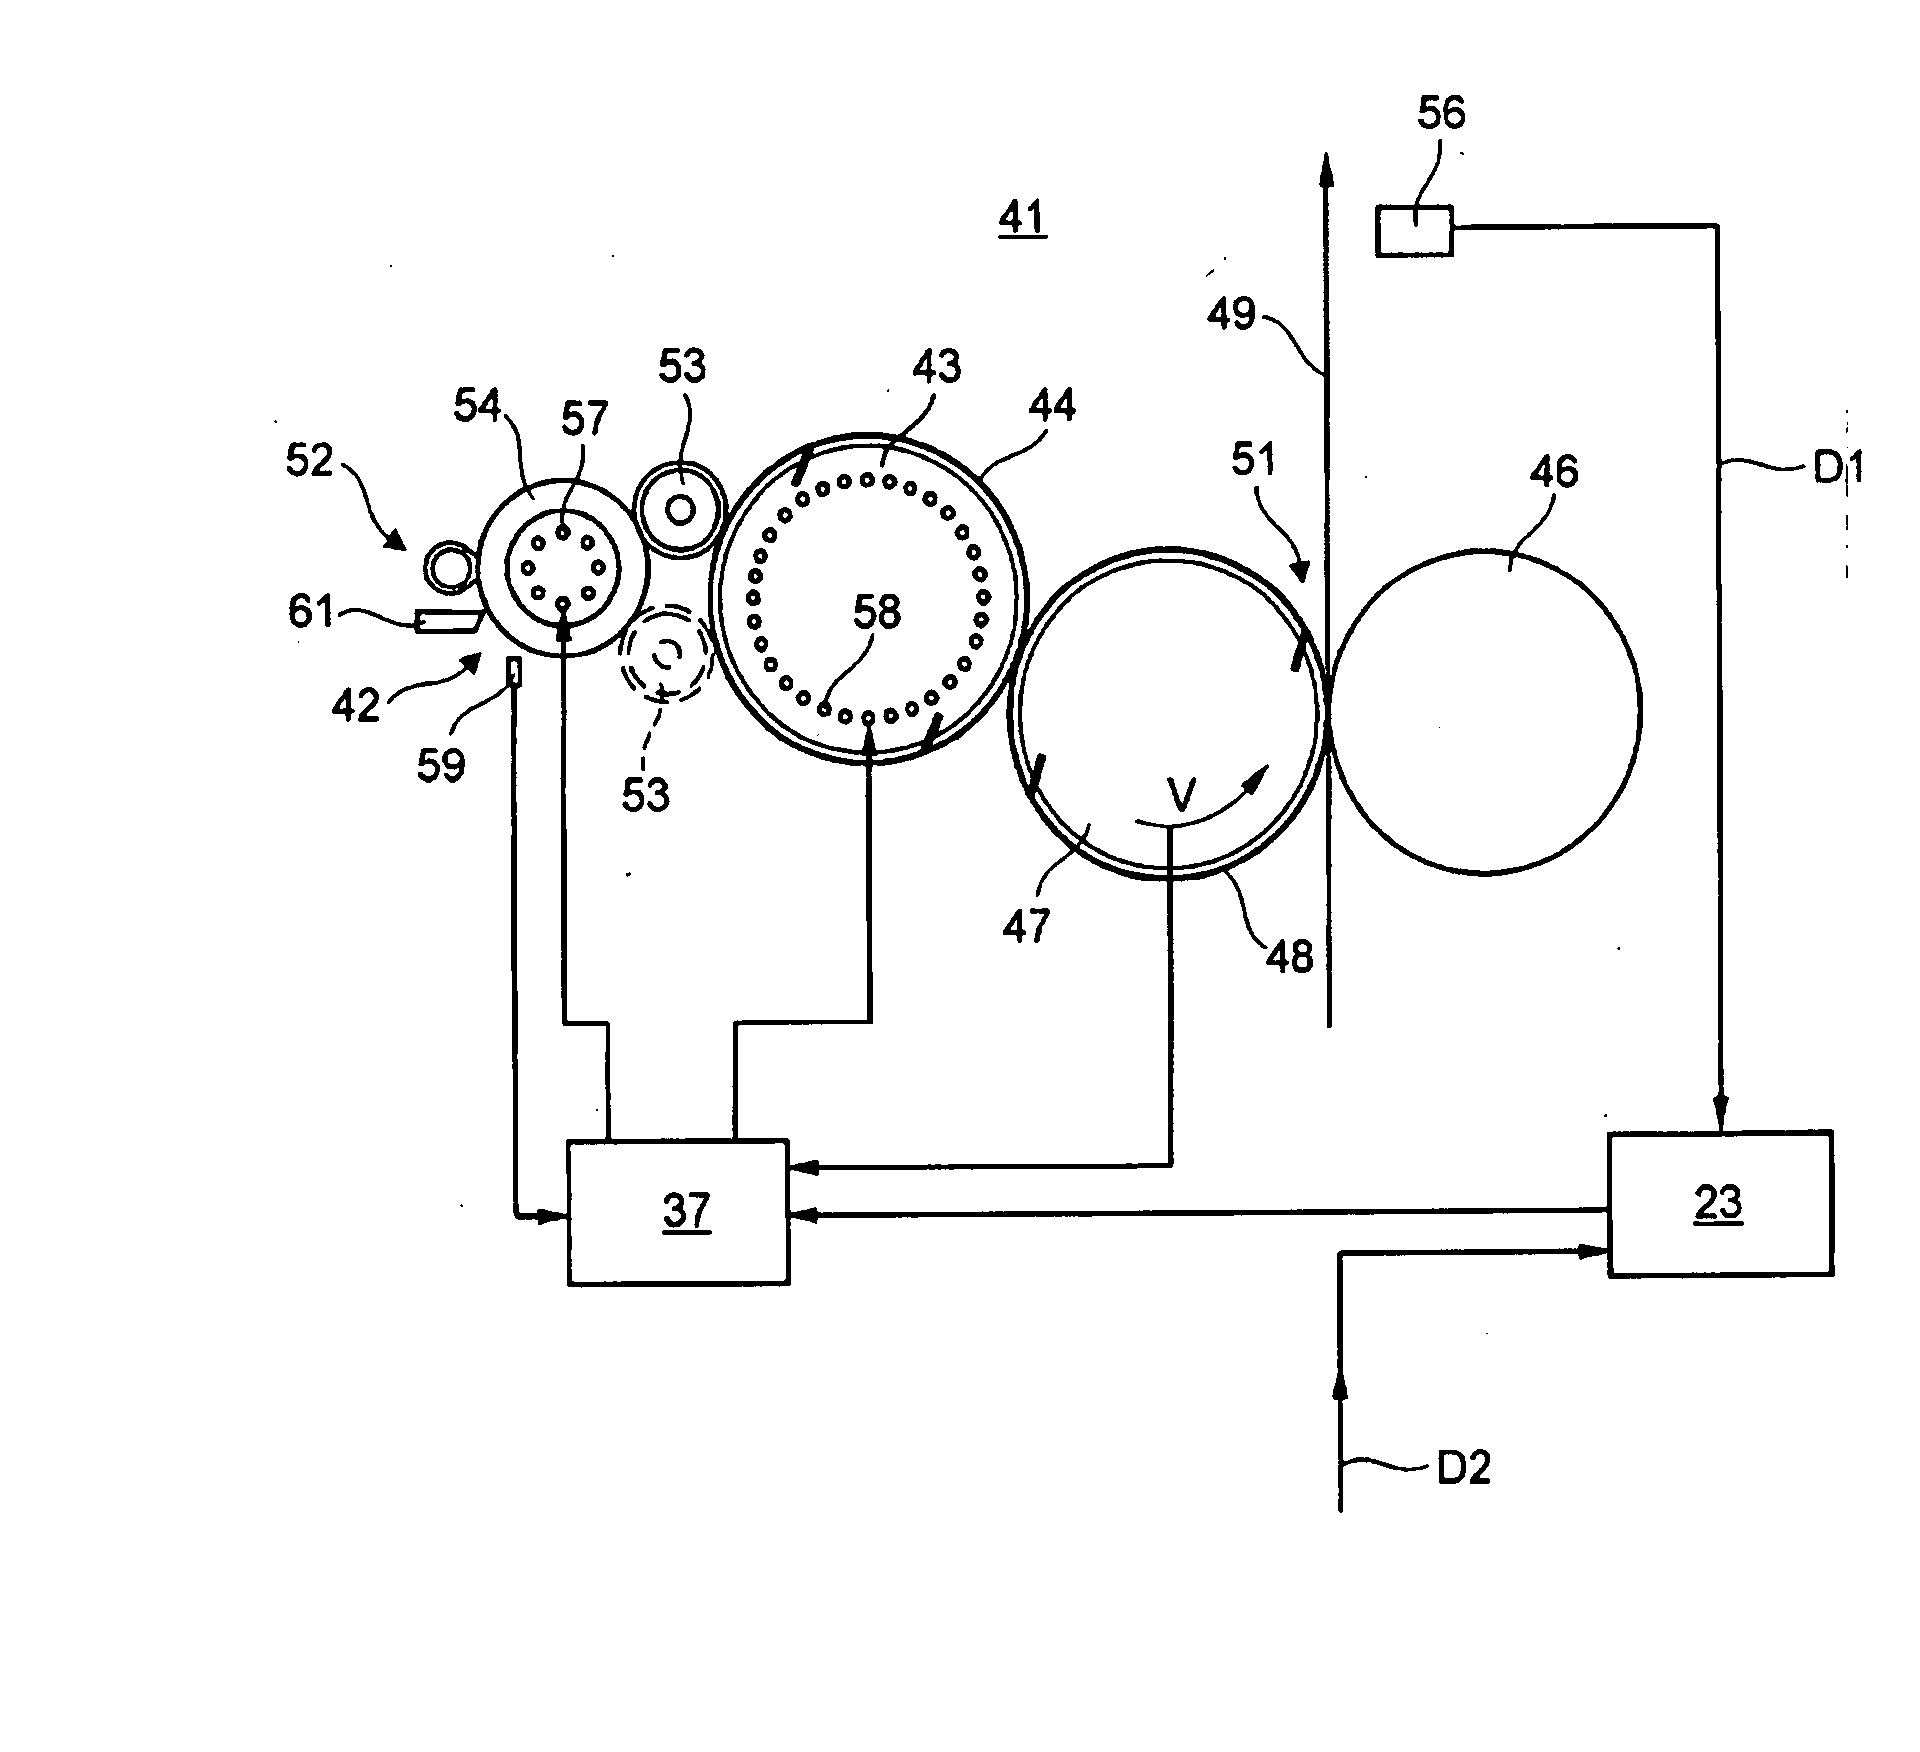 Method and Device for Adjustment of the Transfer of Printing Ink and a Method for Application of Said Device